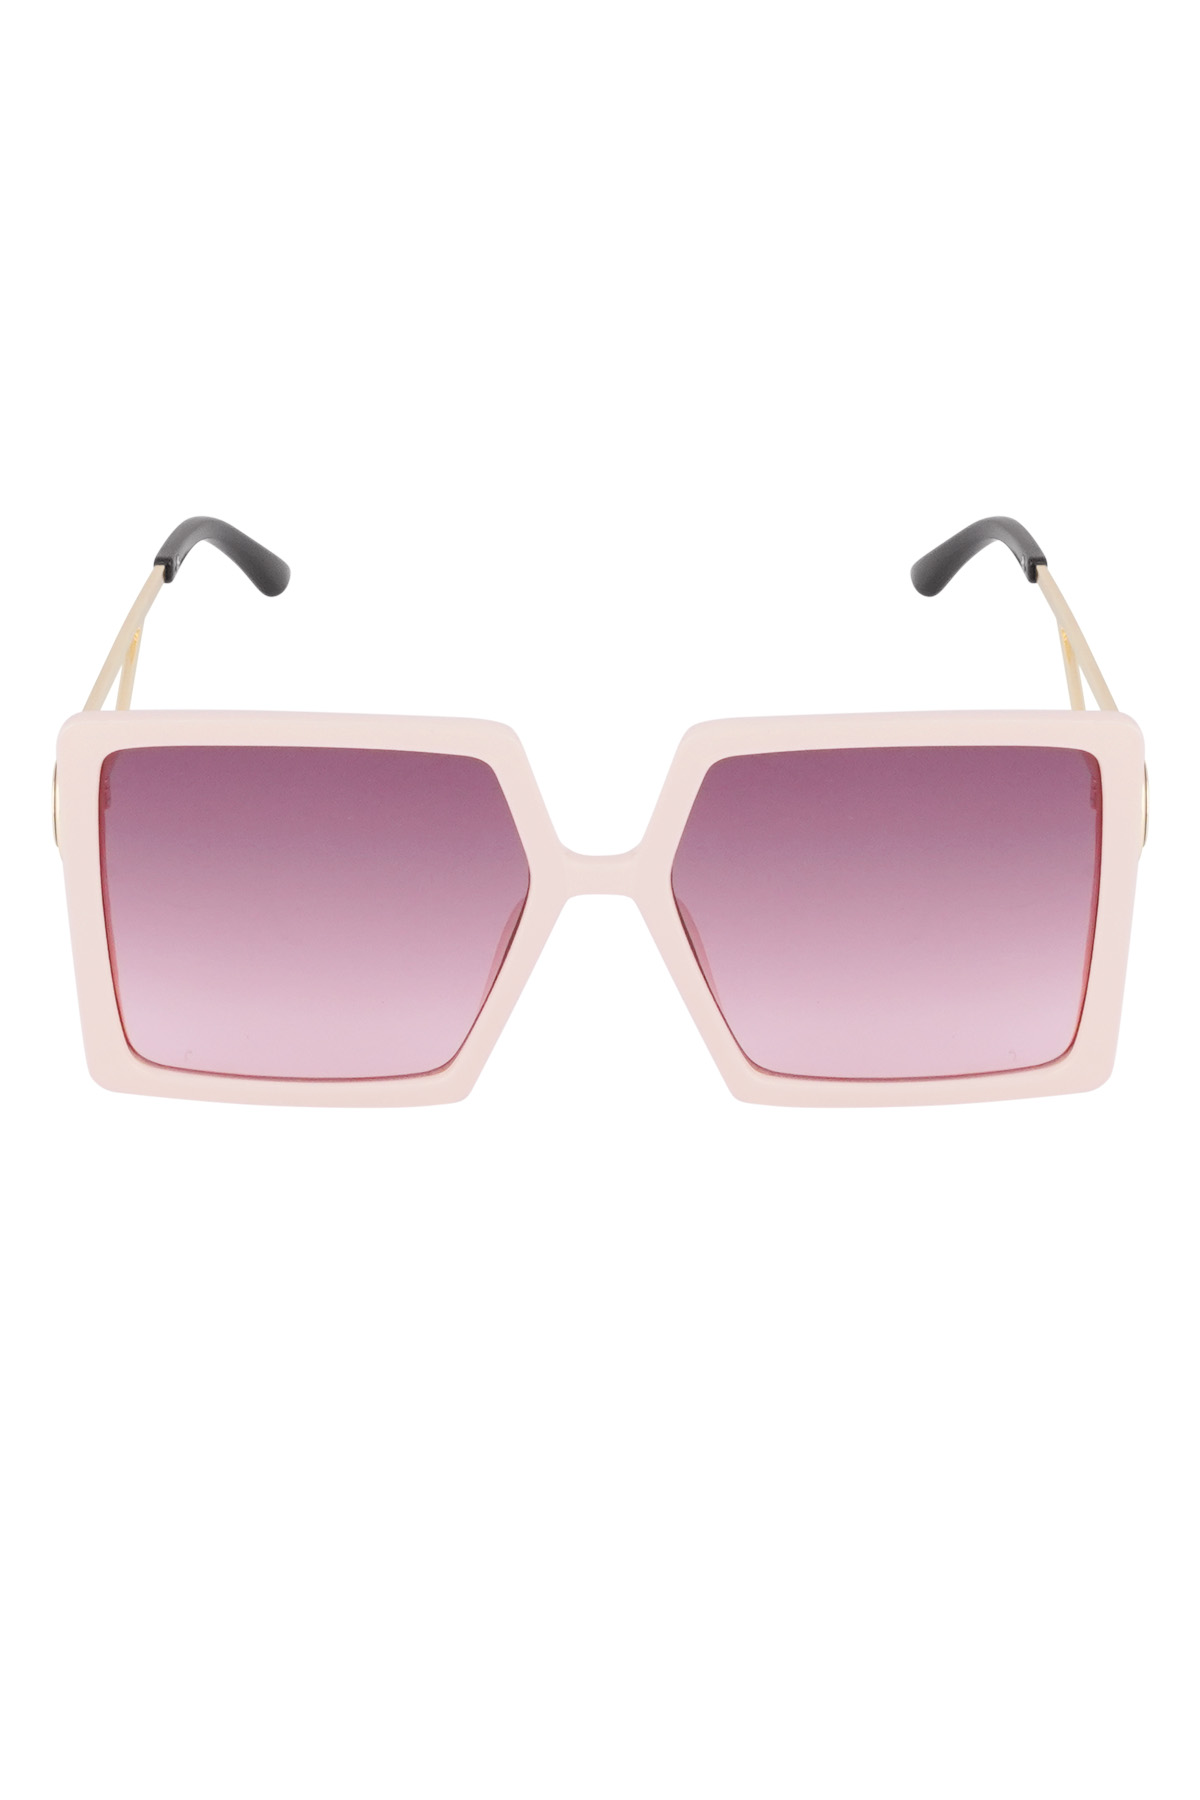 Summer statement sunglasses - pink  Picture4